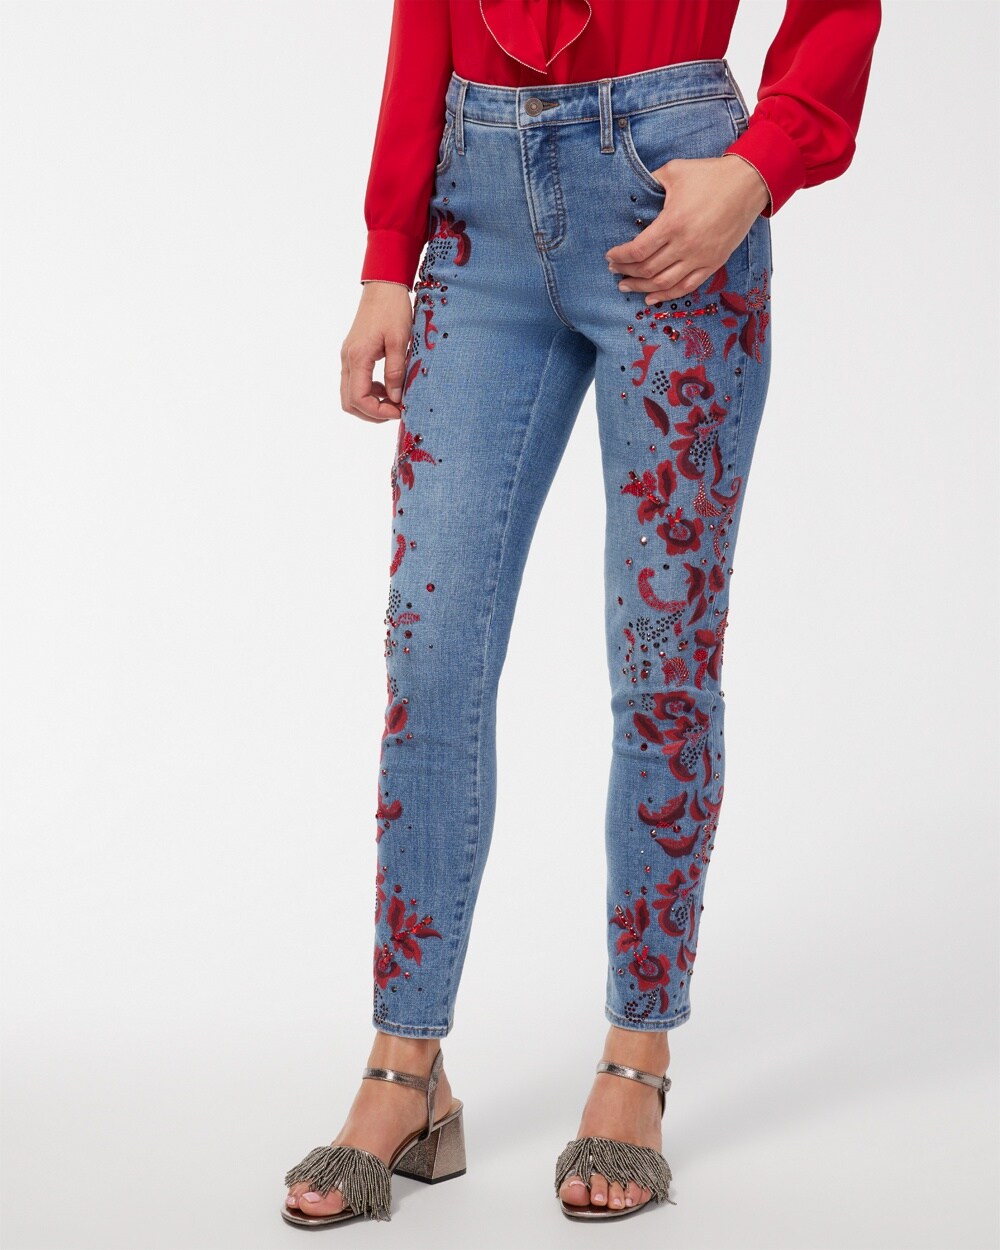 Girlfriend Red Embellished Ankle Jeans In Tacoma Indigo Size 10p Petite |